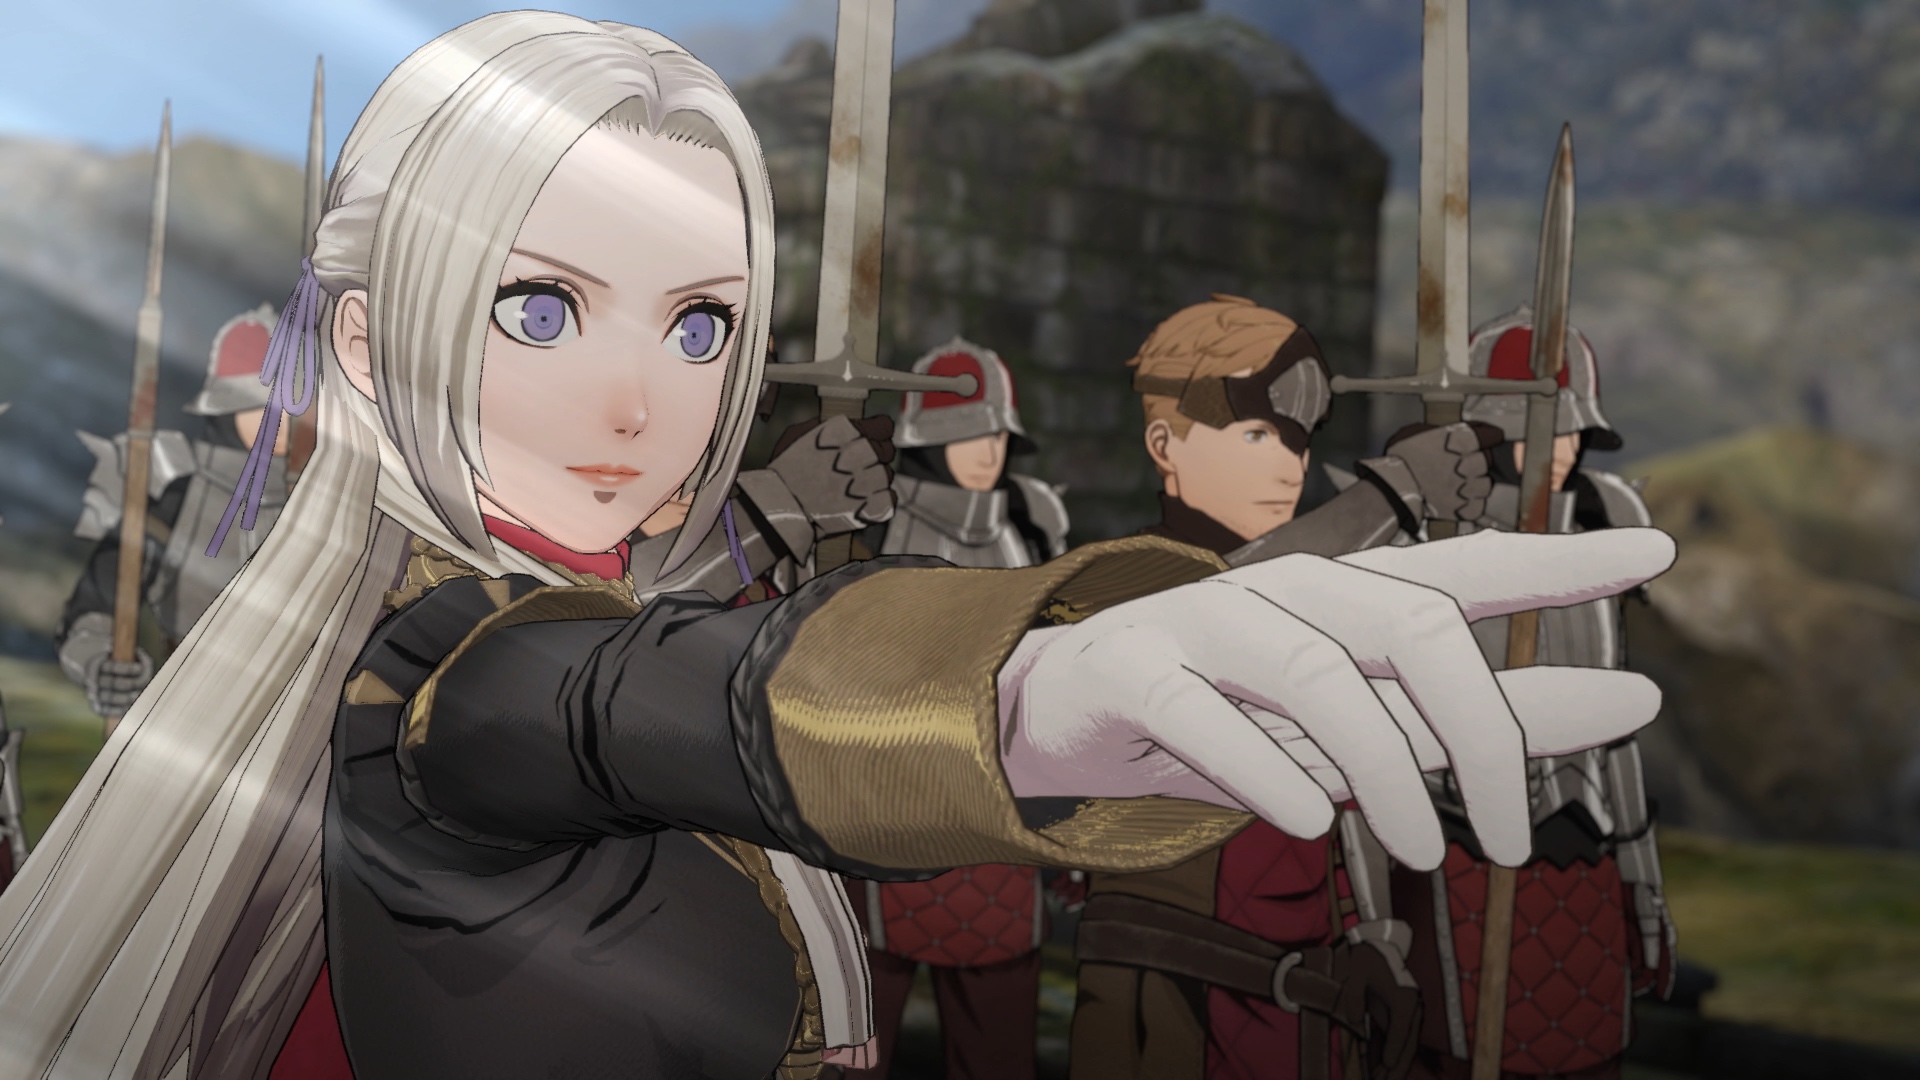 Edelgard points while surrounded by soldiers in Fire Emblem: Three Houses